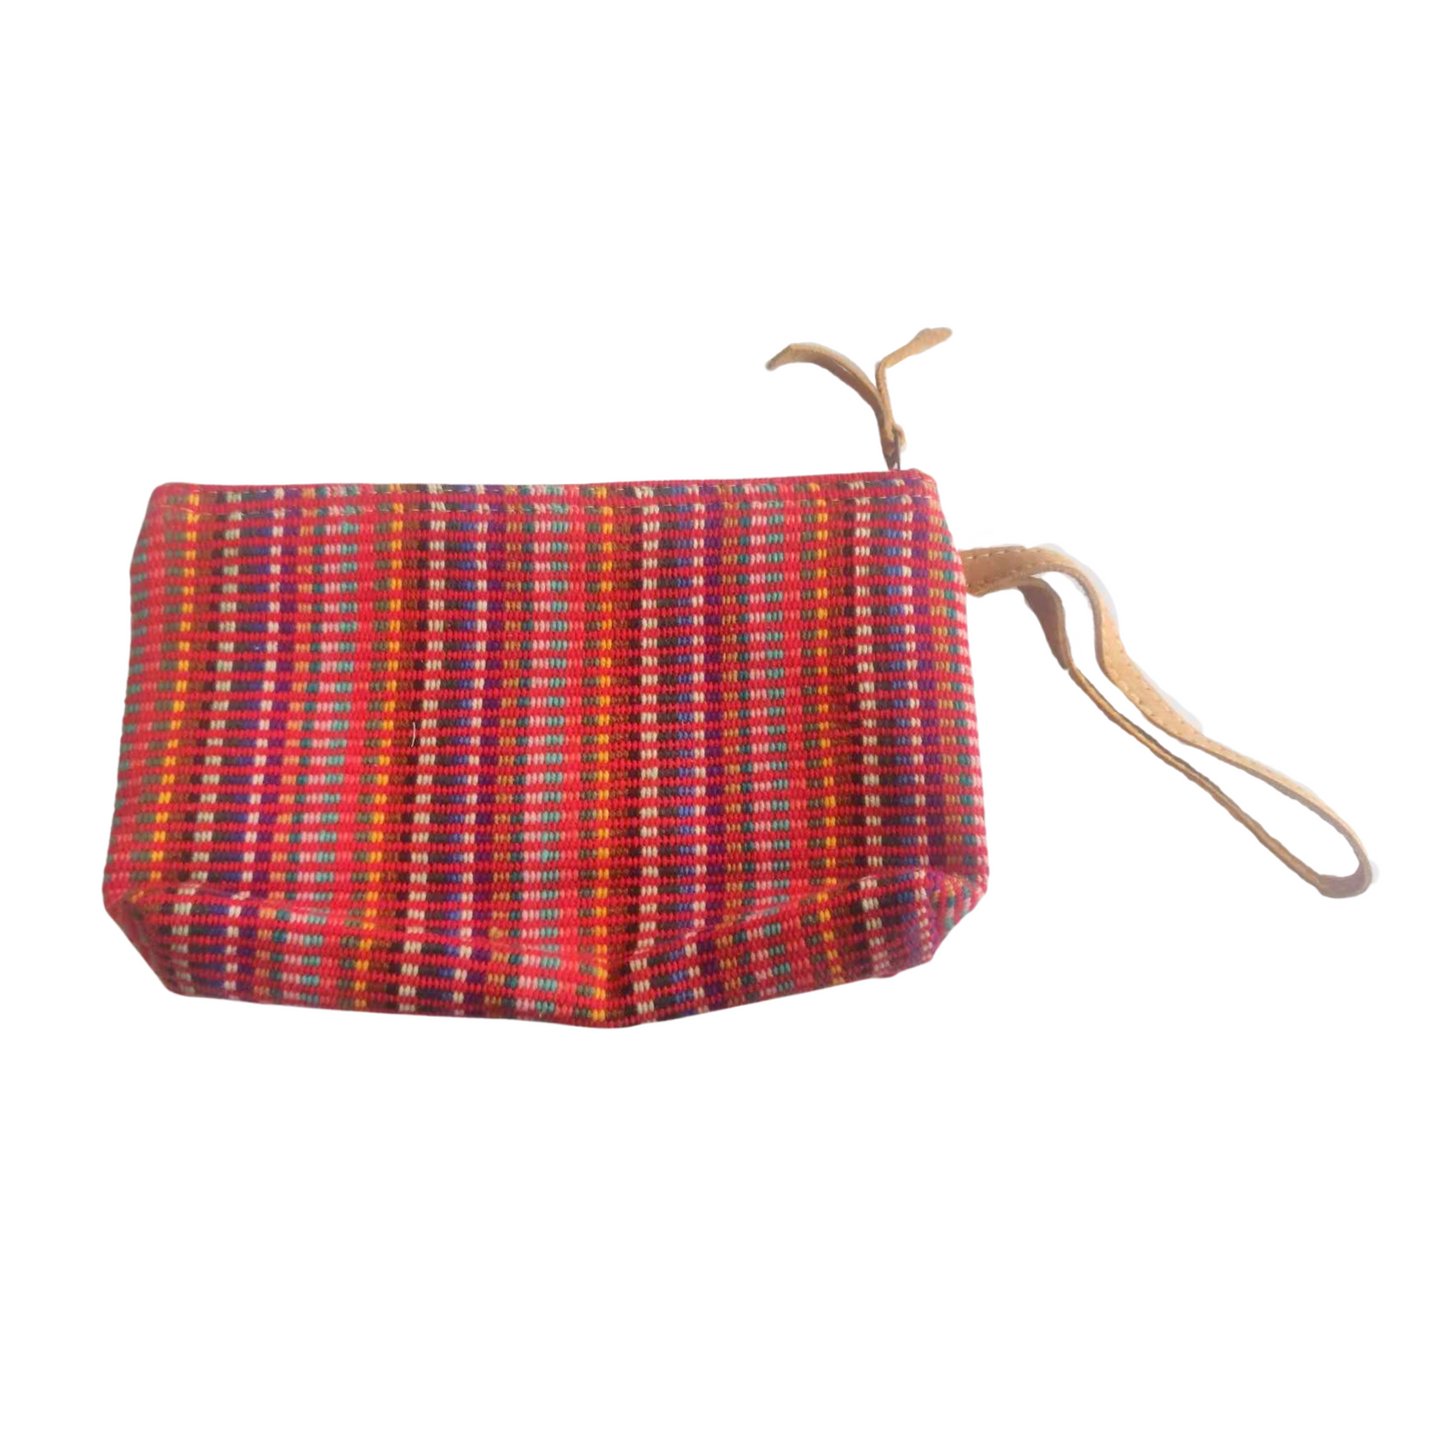 Himal Clutch - 650 Berry | Approx. 5" x 8"